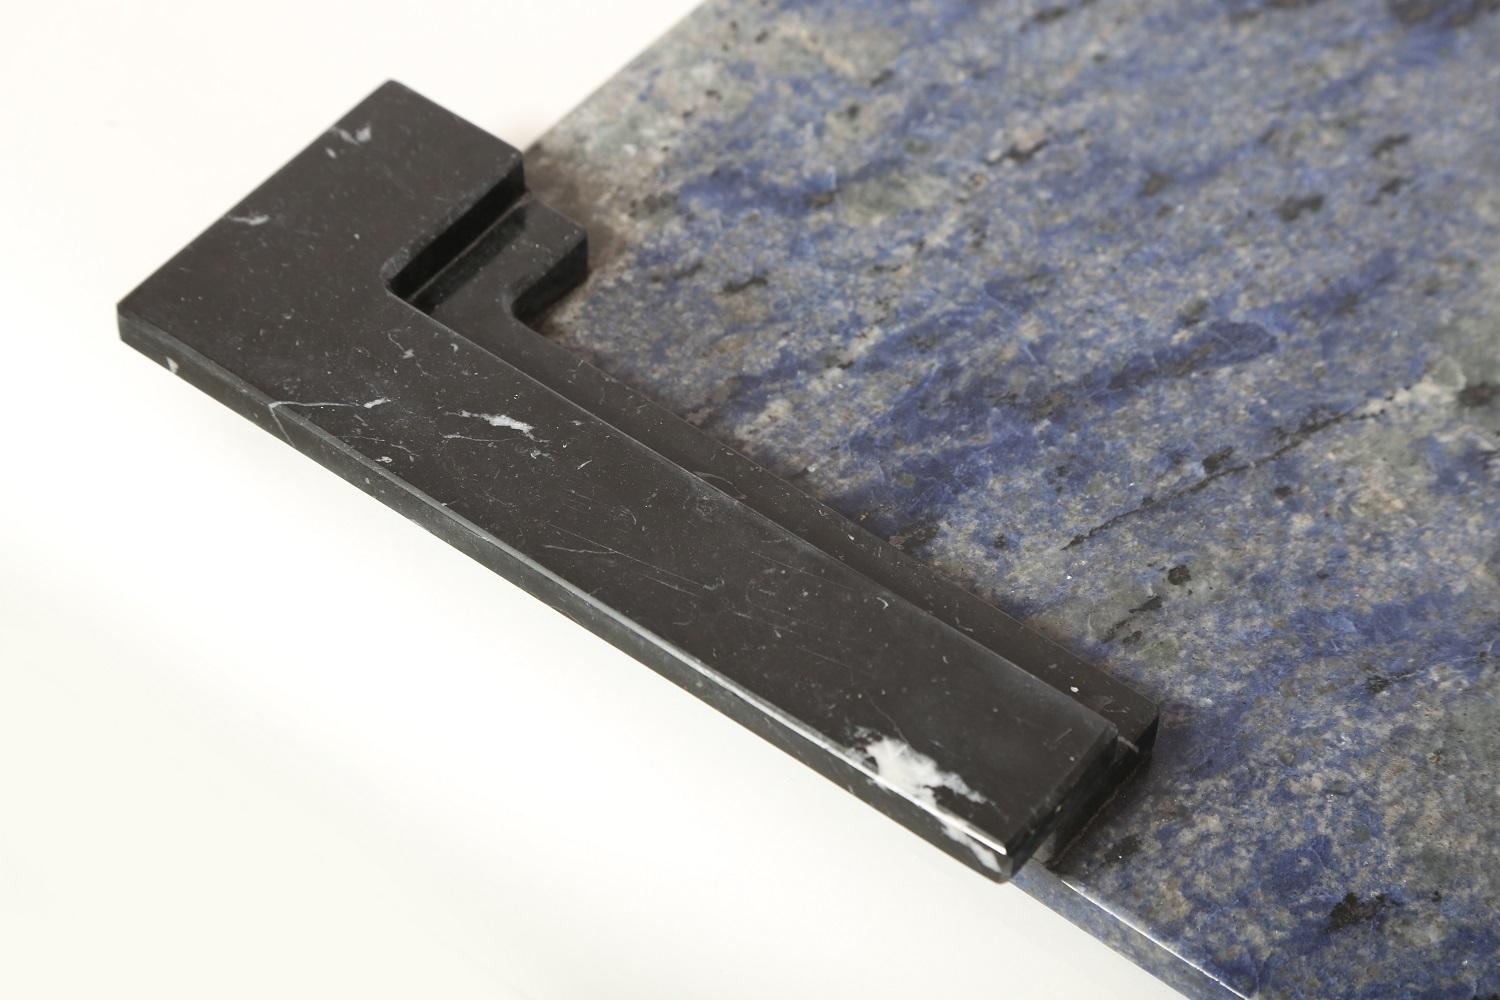 Marble tray in Azul Bahia and Negro marquina. Handmade in Italy, also available in bianco Carrara e Negro marquina. Dimensions can be customized.
Measures: 21.26